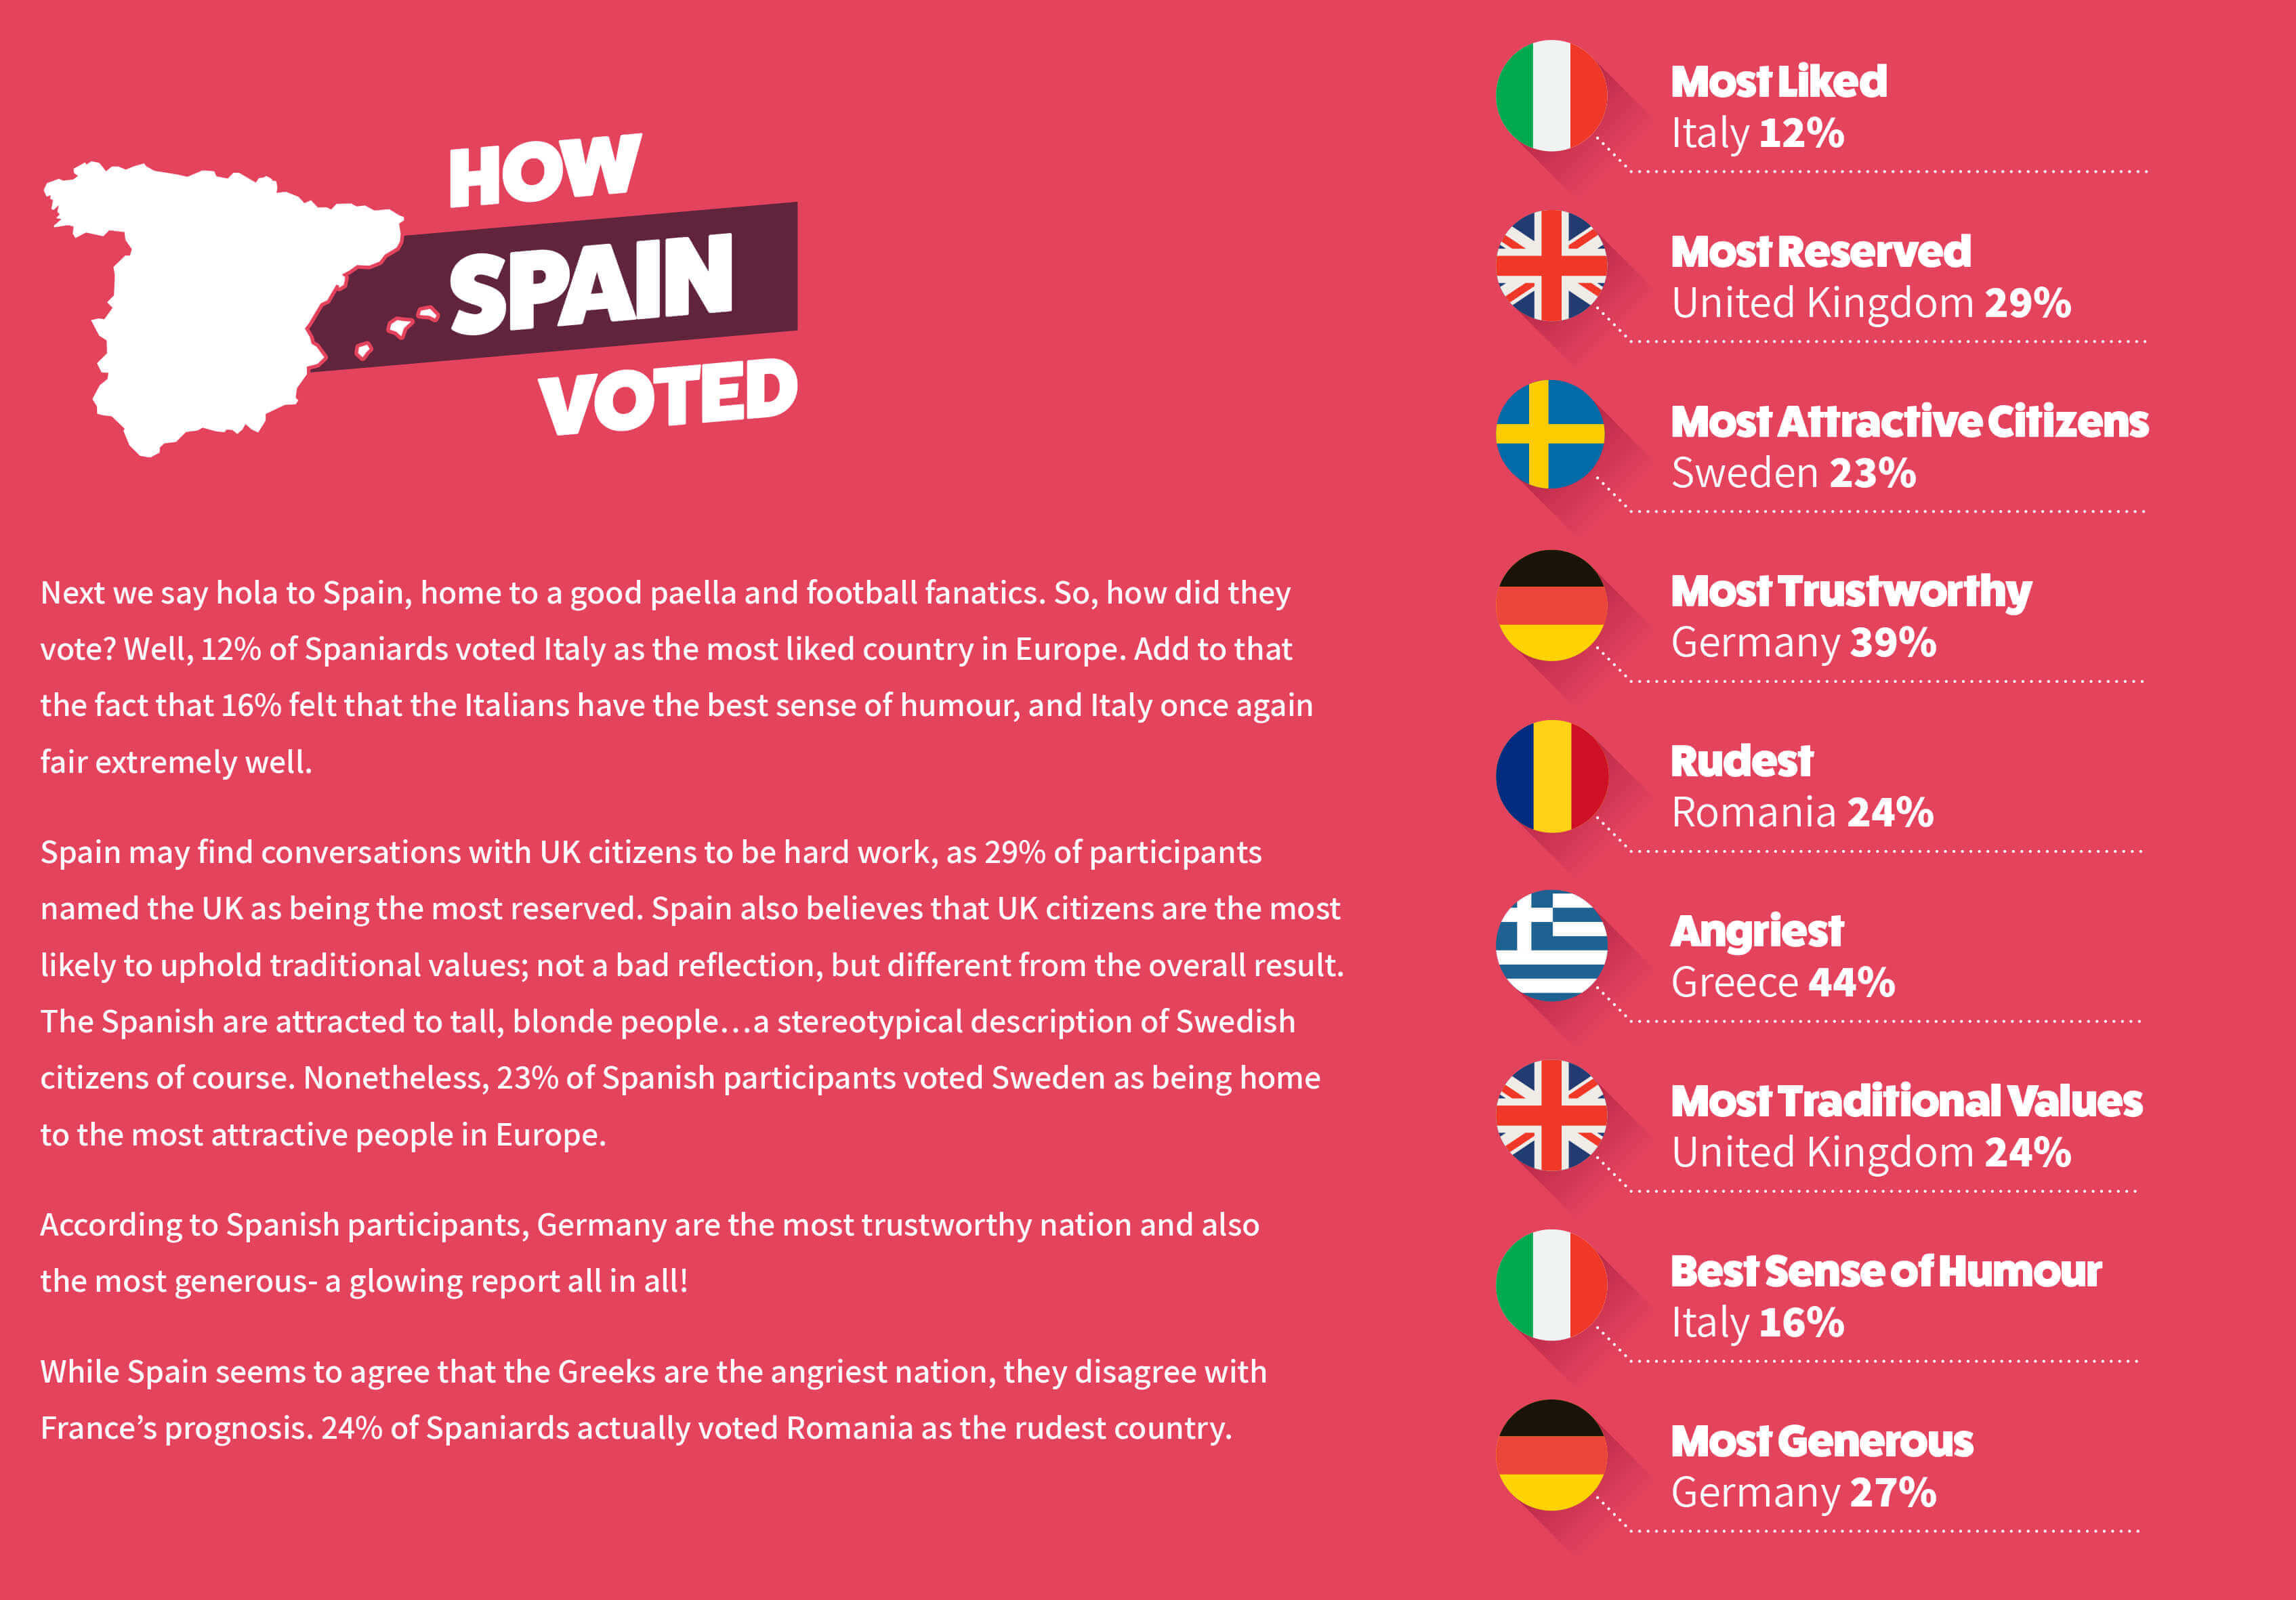 European stereotypes: what do we really think of each other?